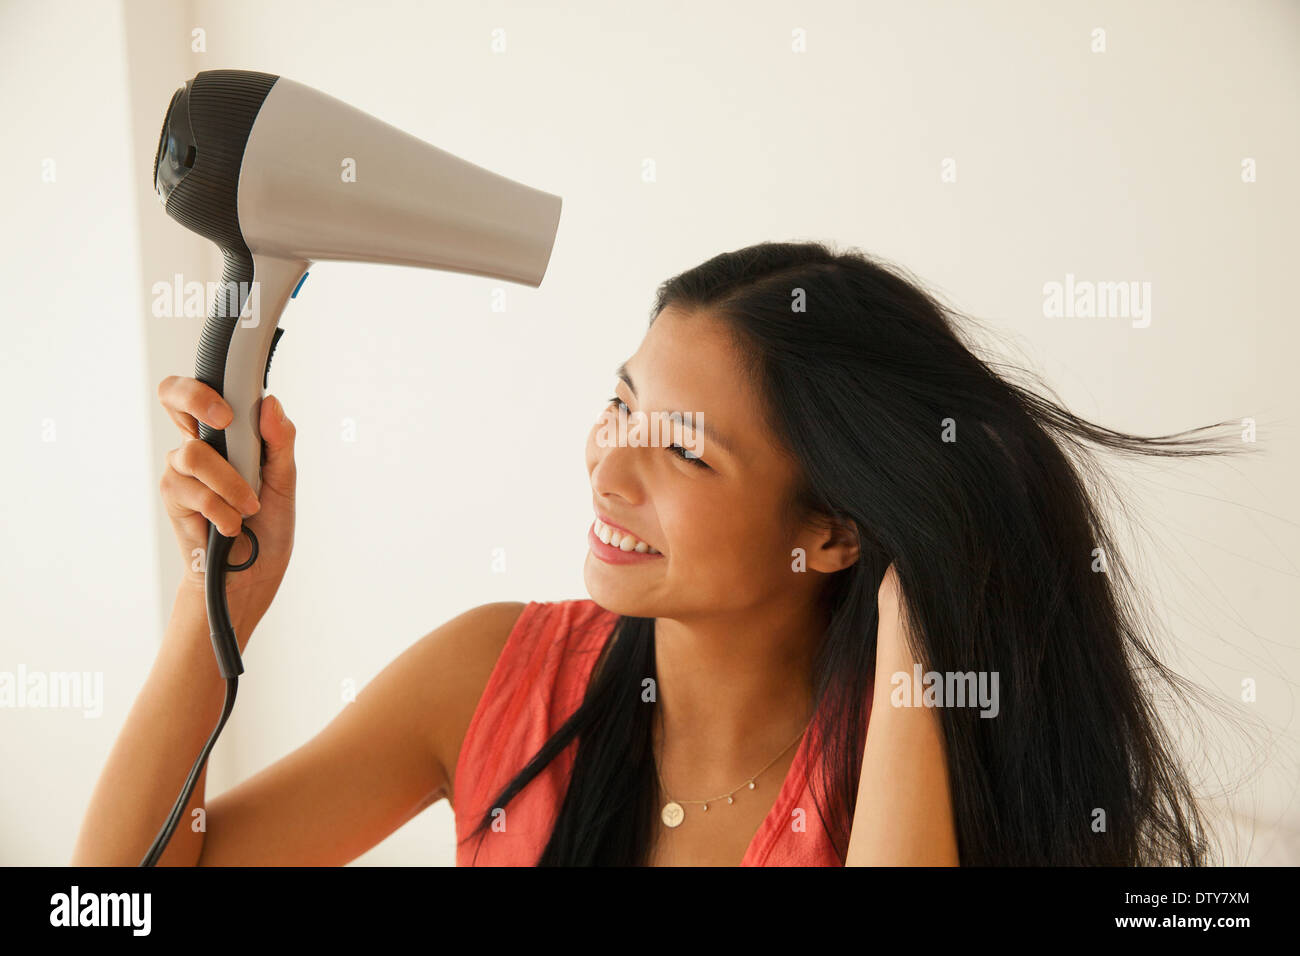 Chinese woman blow drying her hair Stock Photo